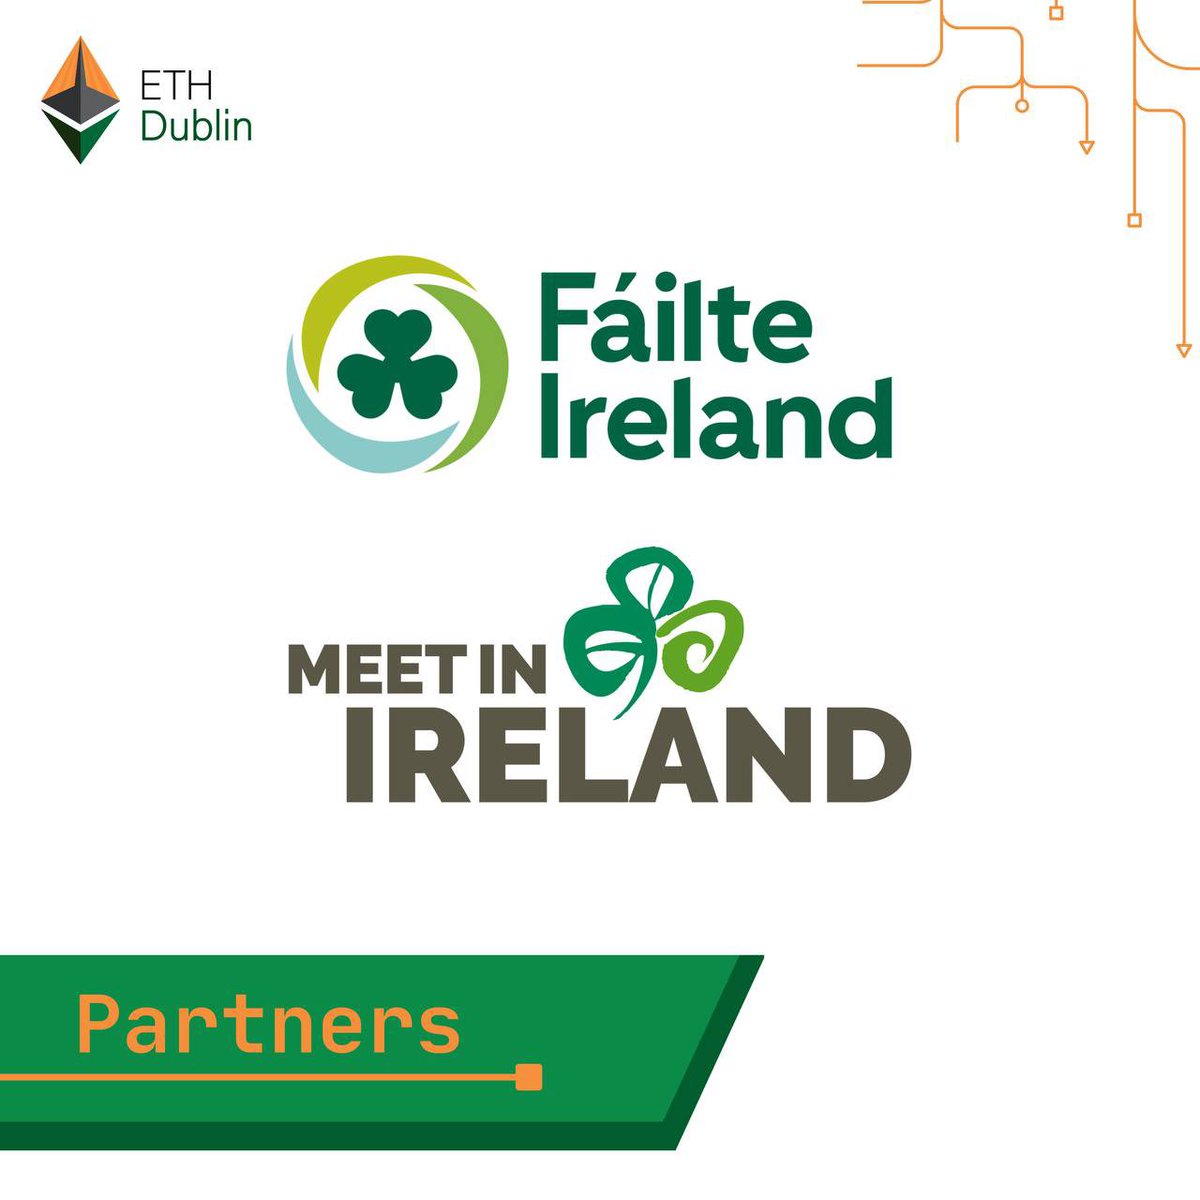 @MeetInIreland enables the brightest talent to connect with confidence 🤝

Owned by @Failte_Ireland, @MeetInIreland is supporting the international Web3 community to @discoverirl 🇮🇪

Choose Ireland, choose ETHDublin! Register your interest to attend here:
ethdublin.io